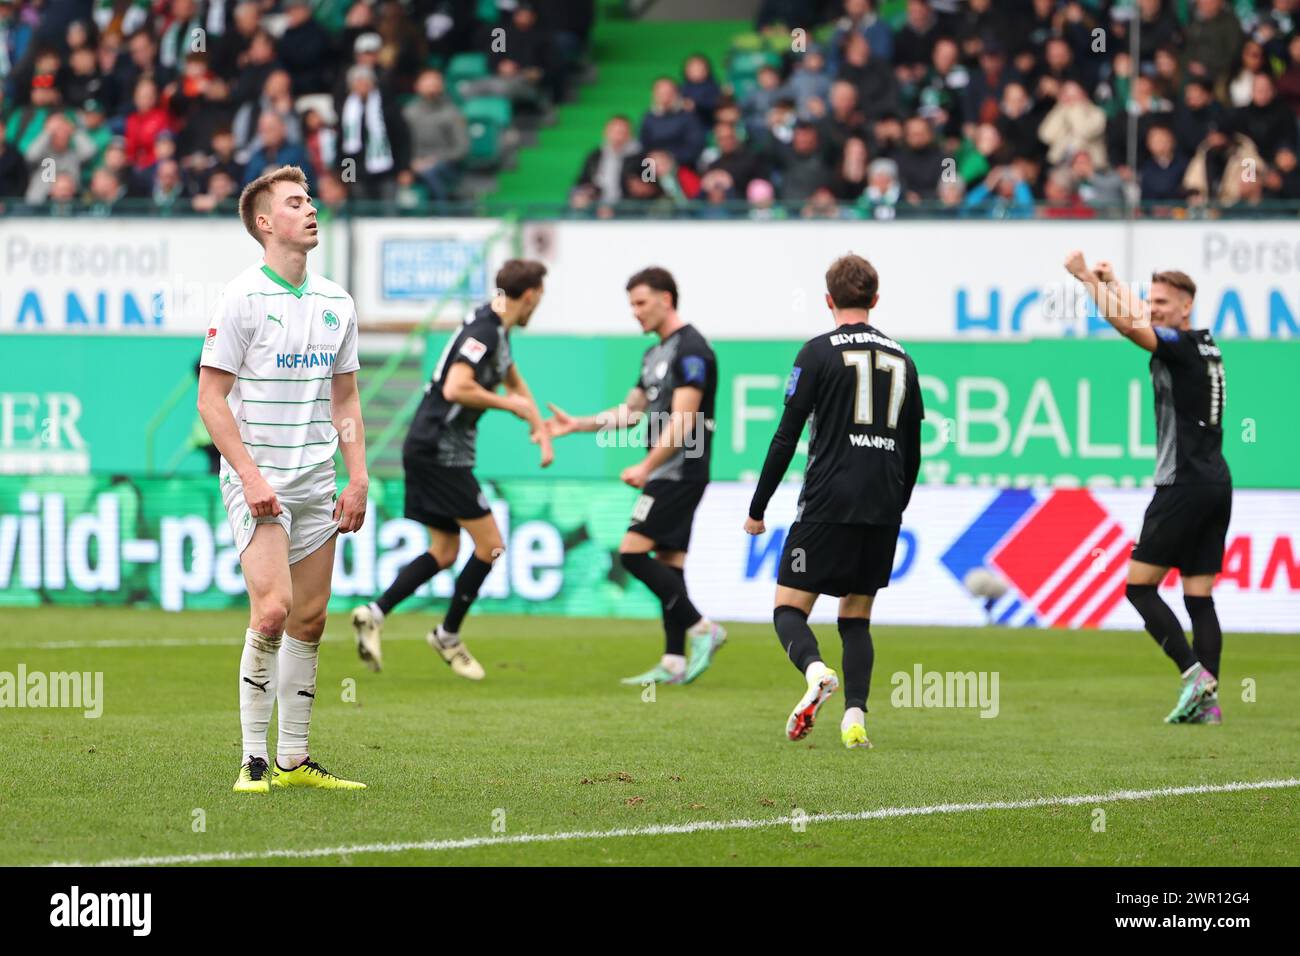 10 March 2024, Bavaria, Fürth: Soccer, Bundesliga 2, SpVgg Greuther Fürth - SV Elversberg, matchday 25 at Sportpark Ronhof Thomas Sommer. Fürth's Gian-Luca Itter (l) stands on the pitch while Paul Stock (2nd from left) from Elversberg celebrates his goal to make it 1-2 with his colleagues. Photo: Daniel Karmann/dpa - IMPORTANT NOTE: In accordance with the regulations of the DFL German Football League and the DFB German Football Association, it is prohibited to utilize or have utilized photographs taken in the stadium and/or of the match in the form of sequential images and/or video-like photo Stock Photo